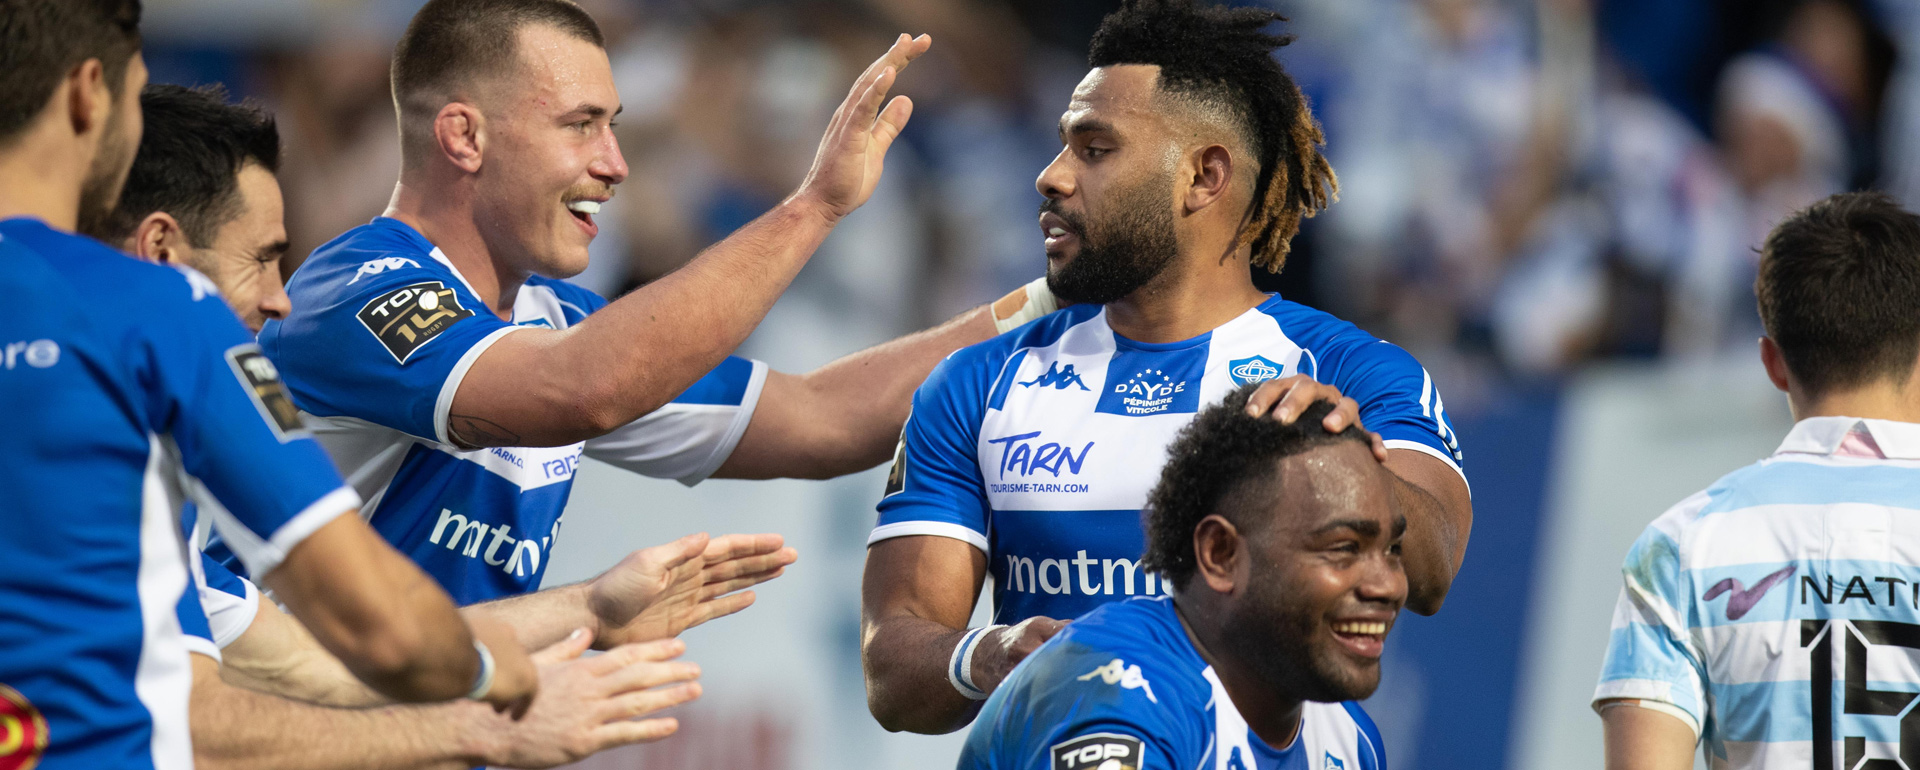 Rugby - Castres Olympique © Patrick Olombel